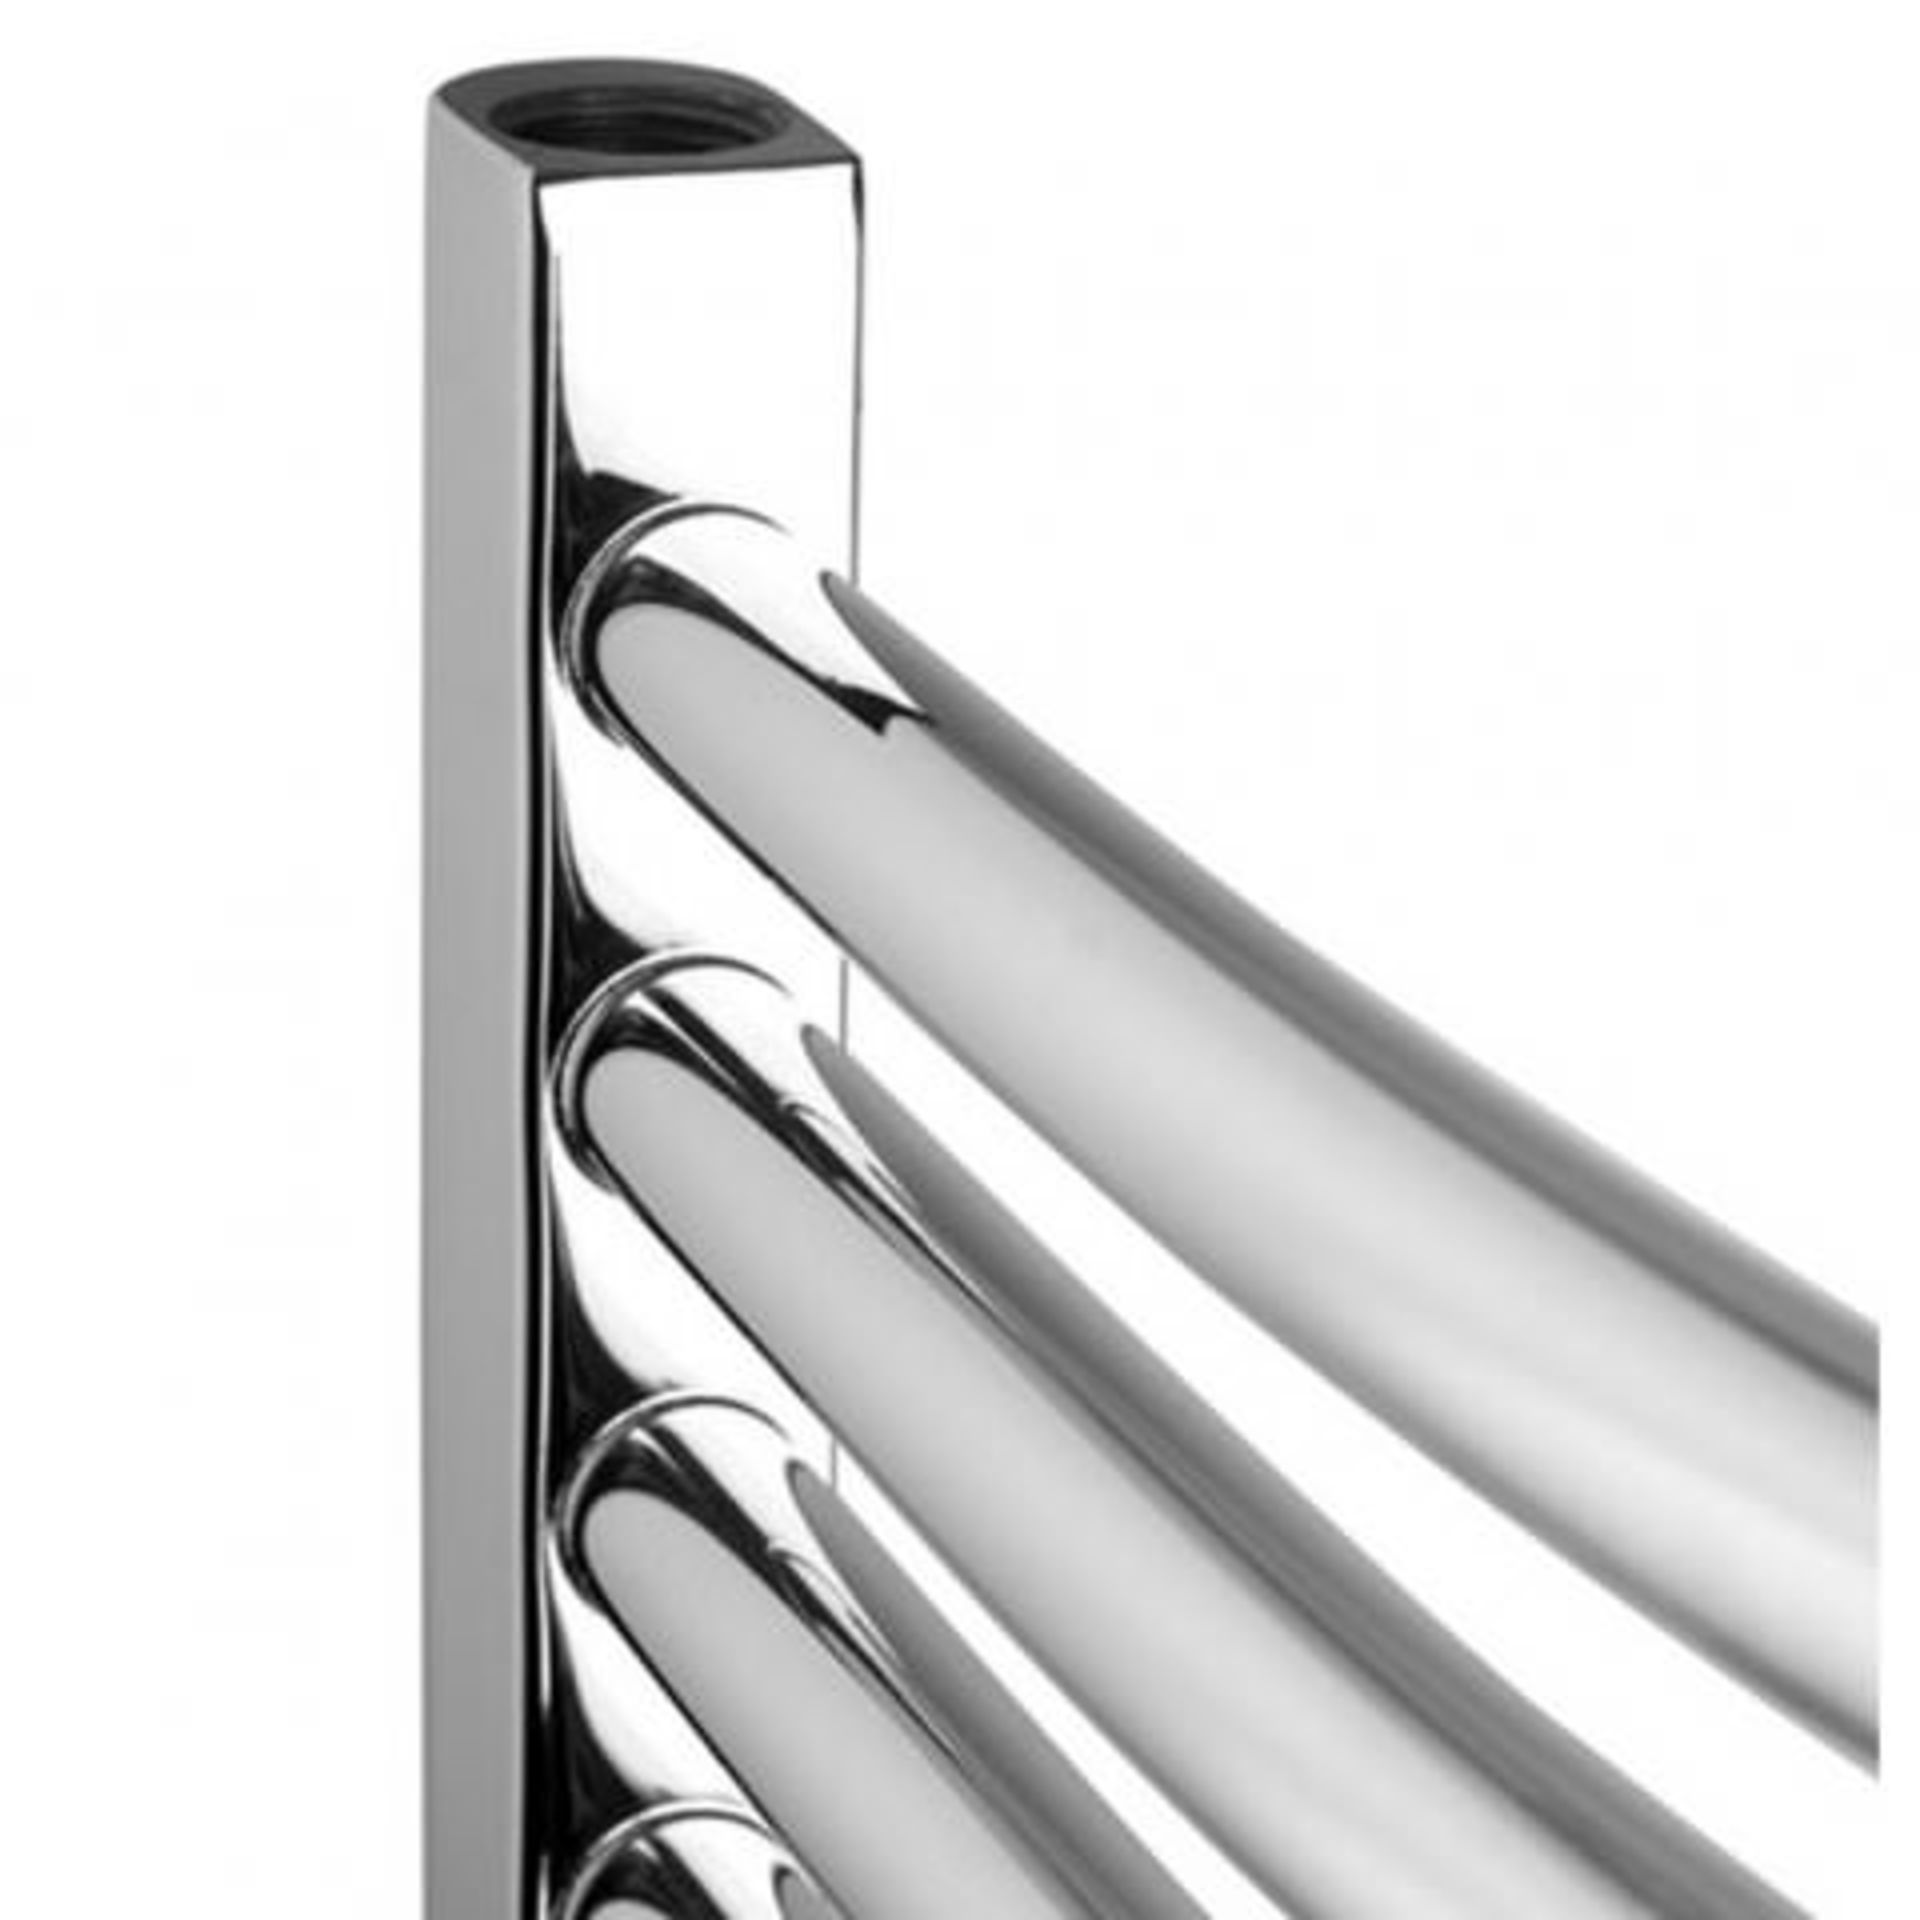 BRAND NEW BOXED 1200x600mm - 20mm Tubes - RRP £219.99. Chrome Curved Rail Ladder Towel Radiato... - Image 3 of 3